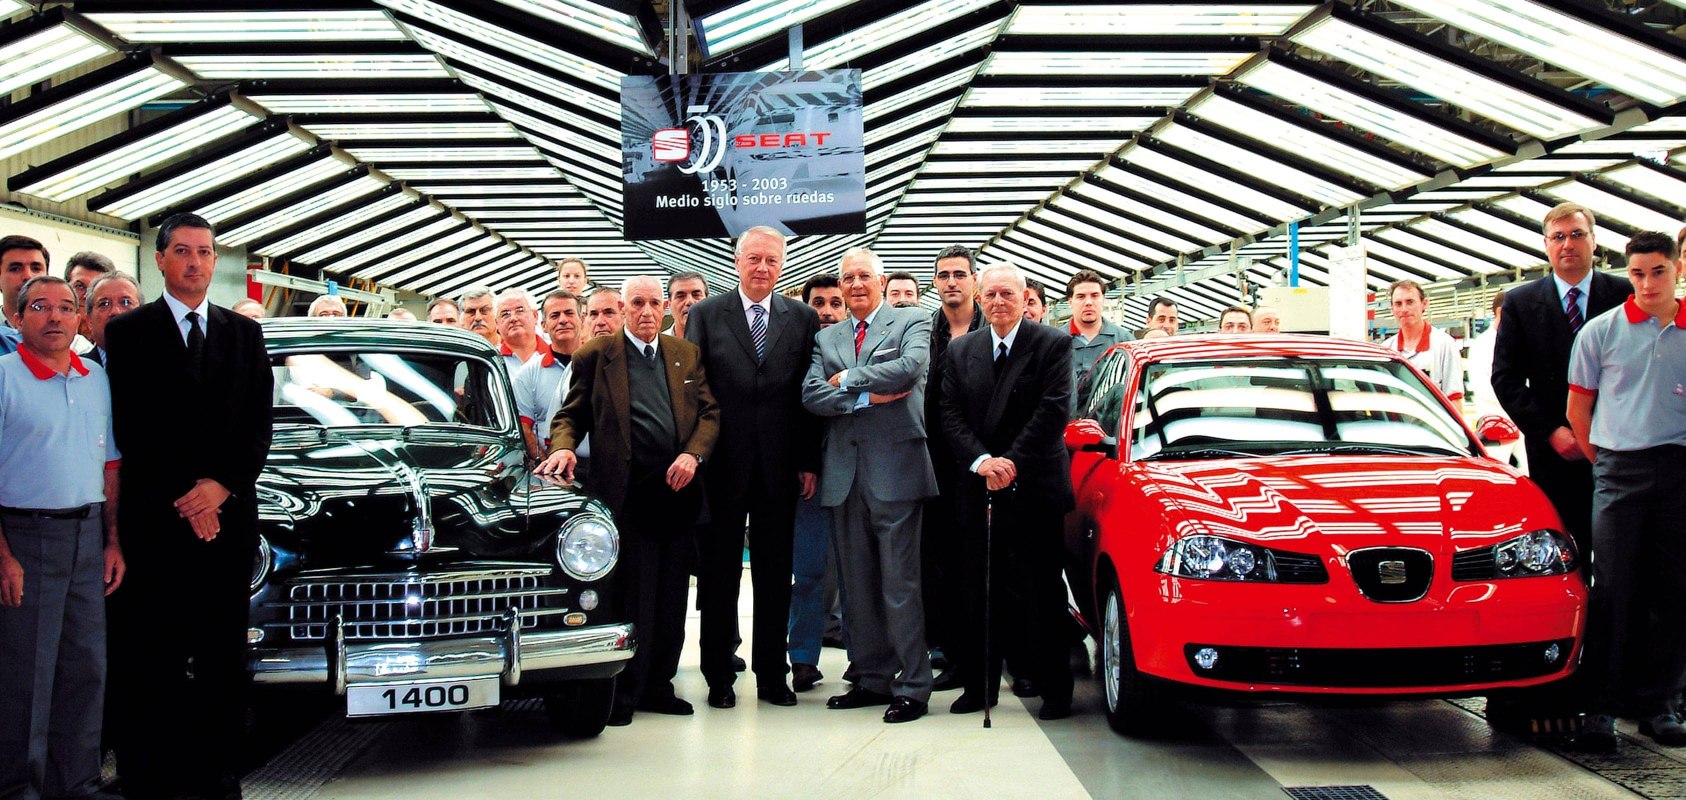 SEAT board members standing with vintage classic SEAT car and SEAT Leon